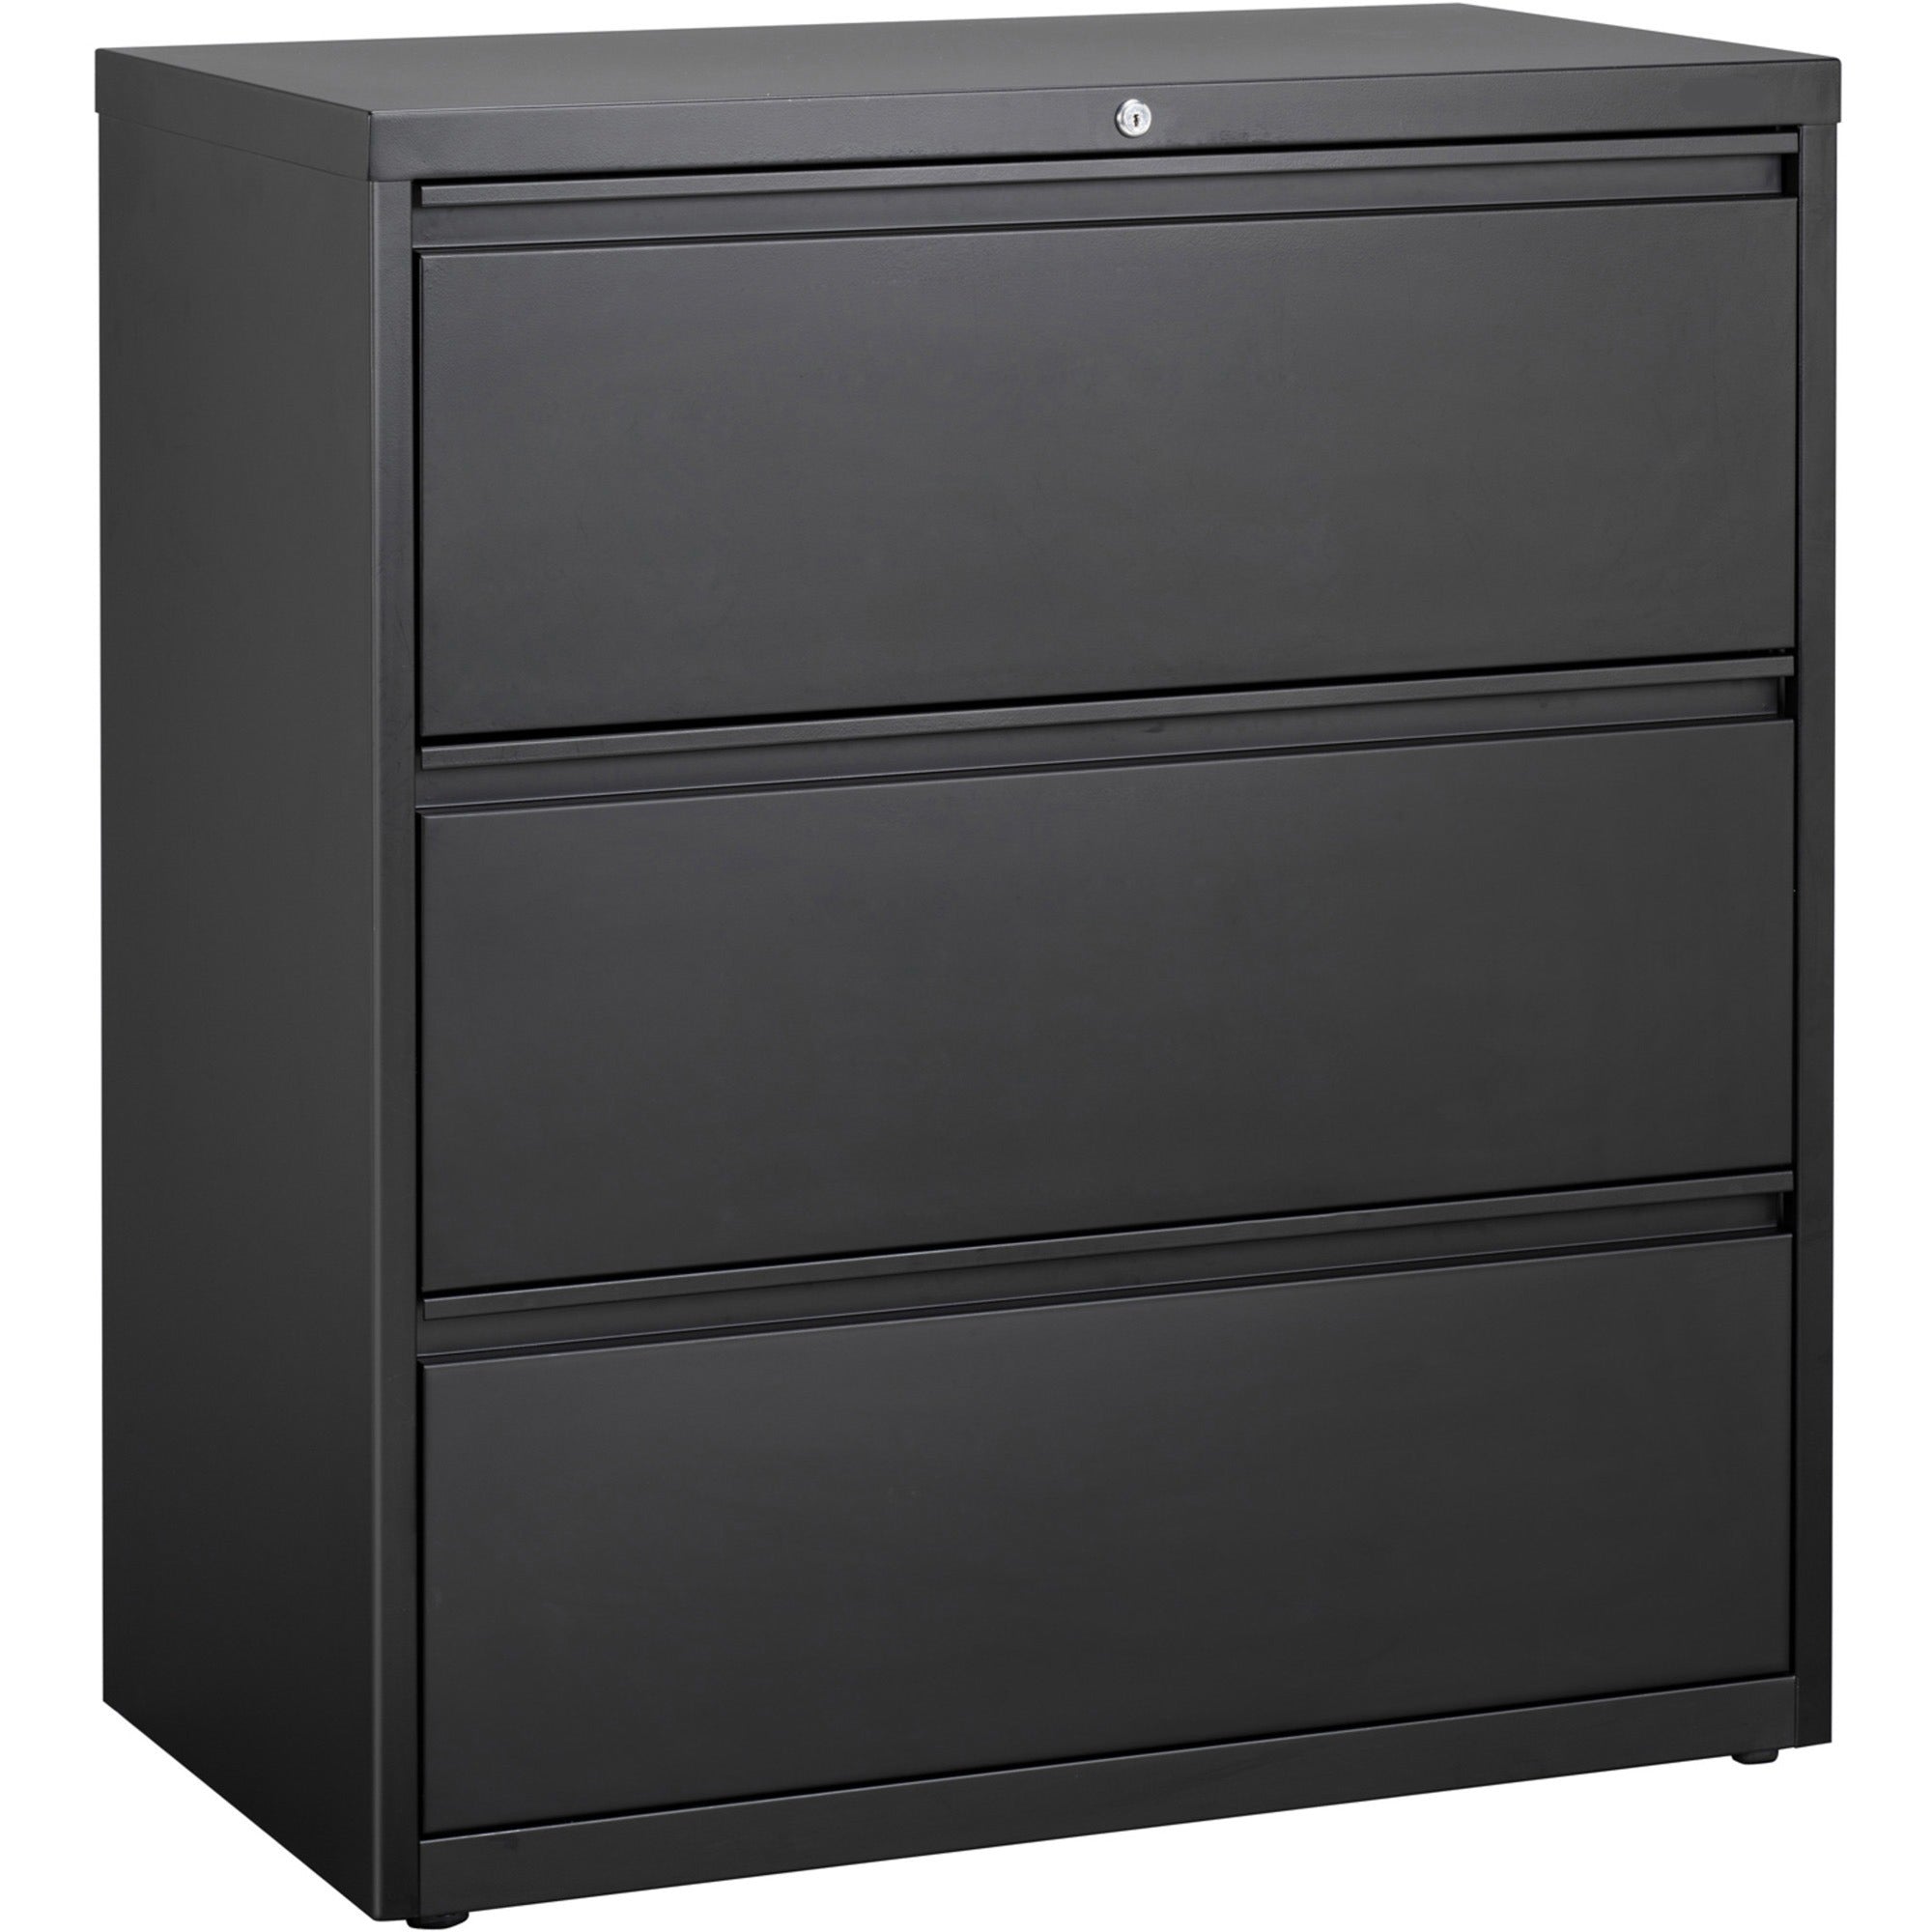 Lorell Fortress Series Lateral File - 36" x 18.6" x 40.3" - 3 x Drawer(s) for File - Letter, Legal, A4 - Lateral - Locking Drawer, Magnetic Label Holder, Ball-bearing Suspension, Leveling Glide - Black - Steel - Recycled - 